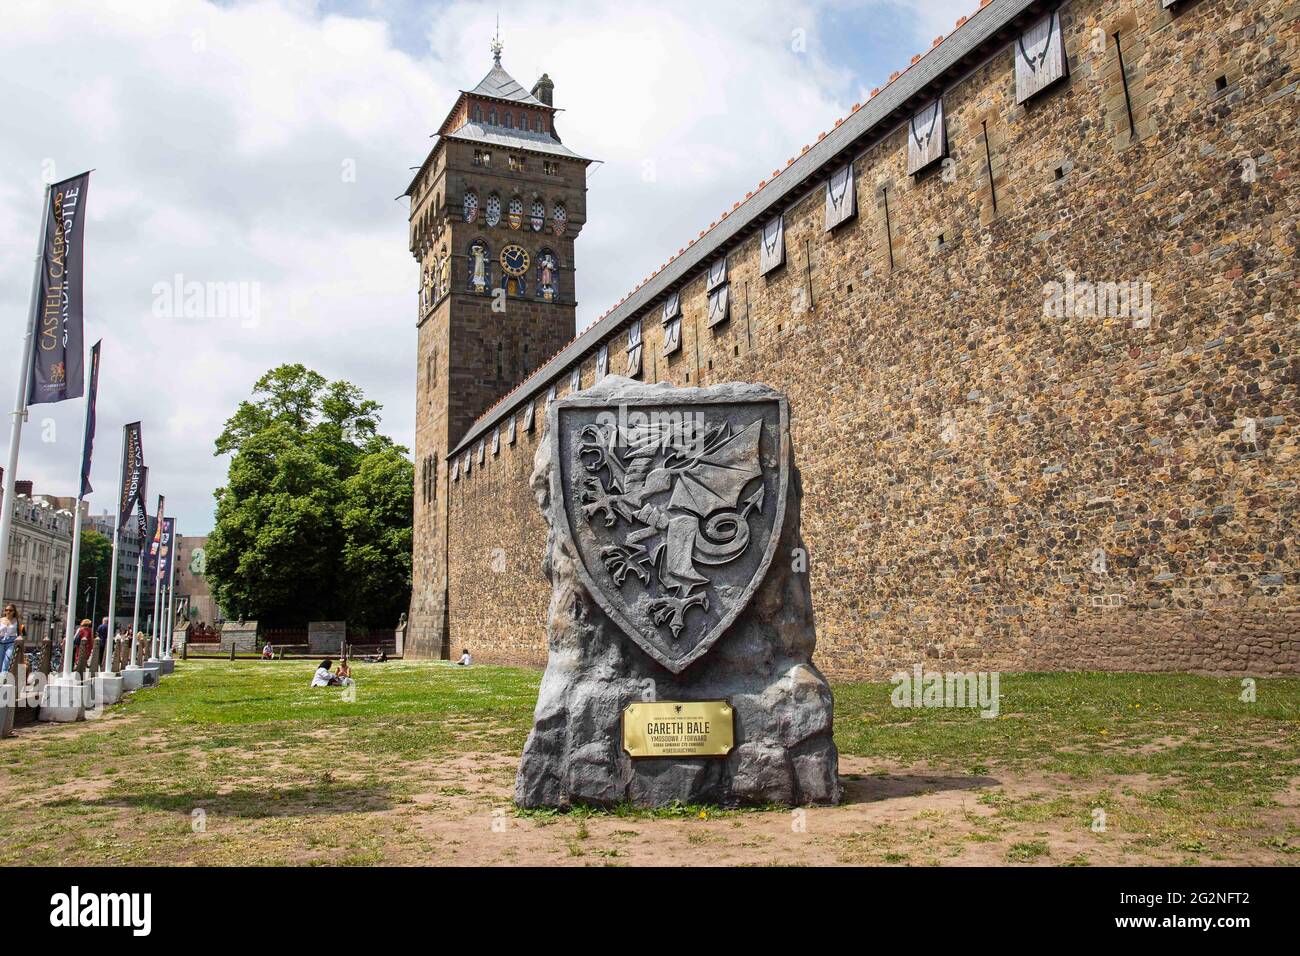 A Welsh dragon football crest outside Cardiff Castle during Euro 2020, June 2021. Stock Photo